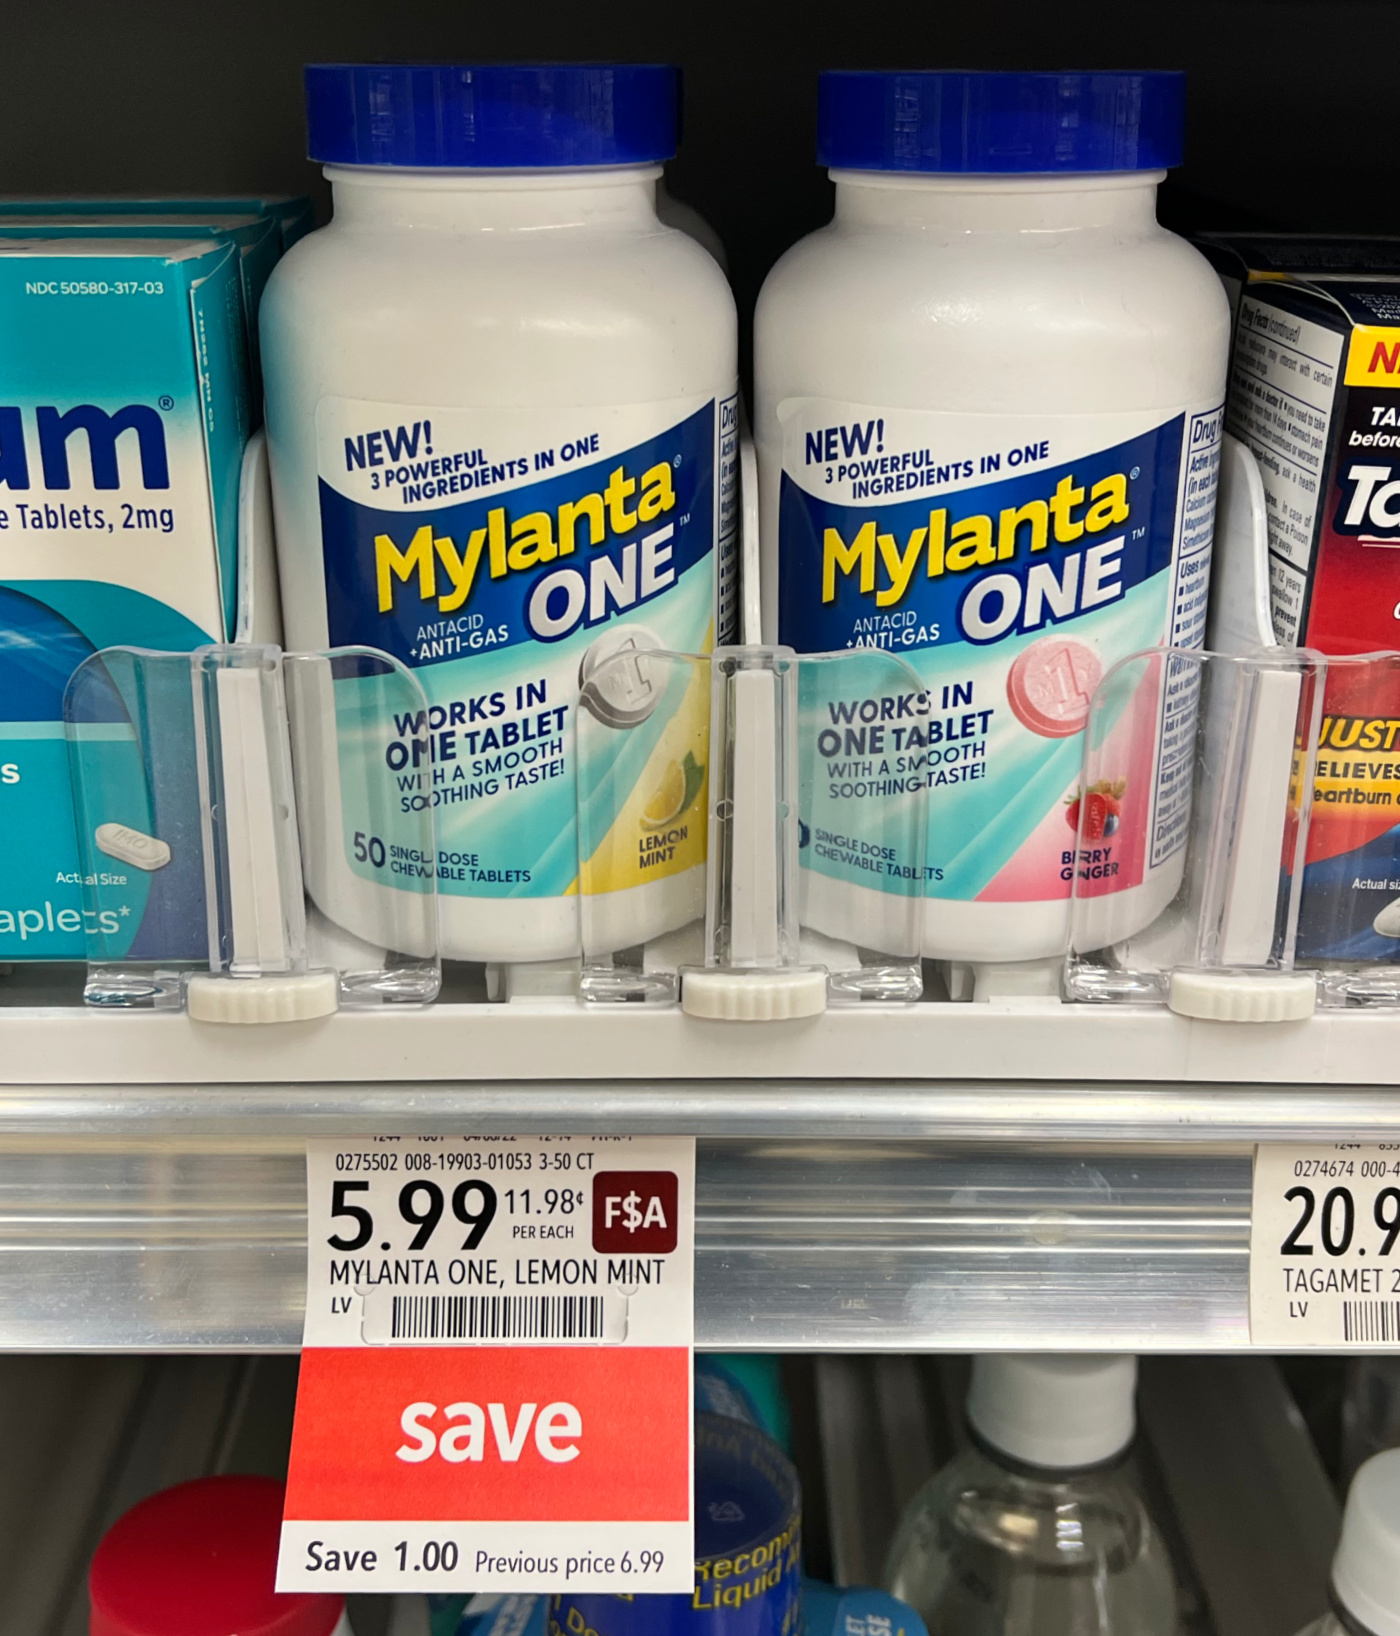 Get All-In-One Relief In ONE Powerful Tablet - Mylanta ONE Is On Sale Now At Publix on I Heart Publix 1